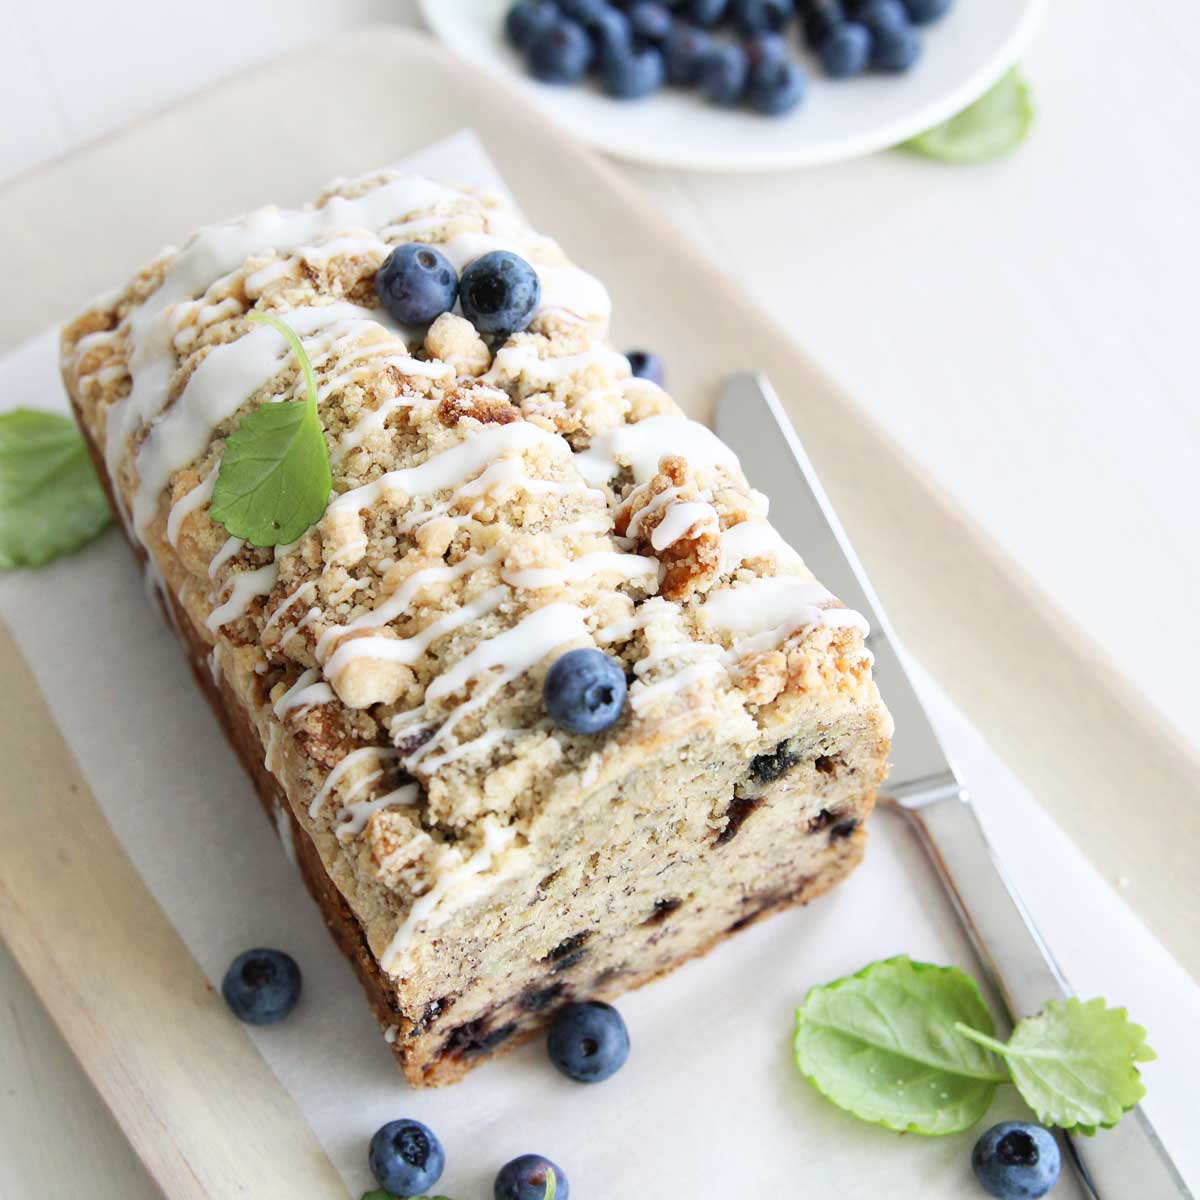 Blueberry Banana Bread with Oats & Streusel (Eggless, Dairy Free) - Flourless Banana Roll Cake